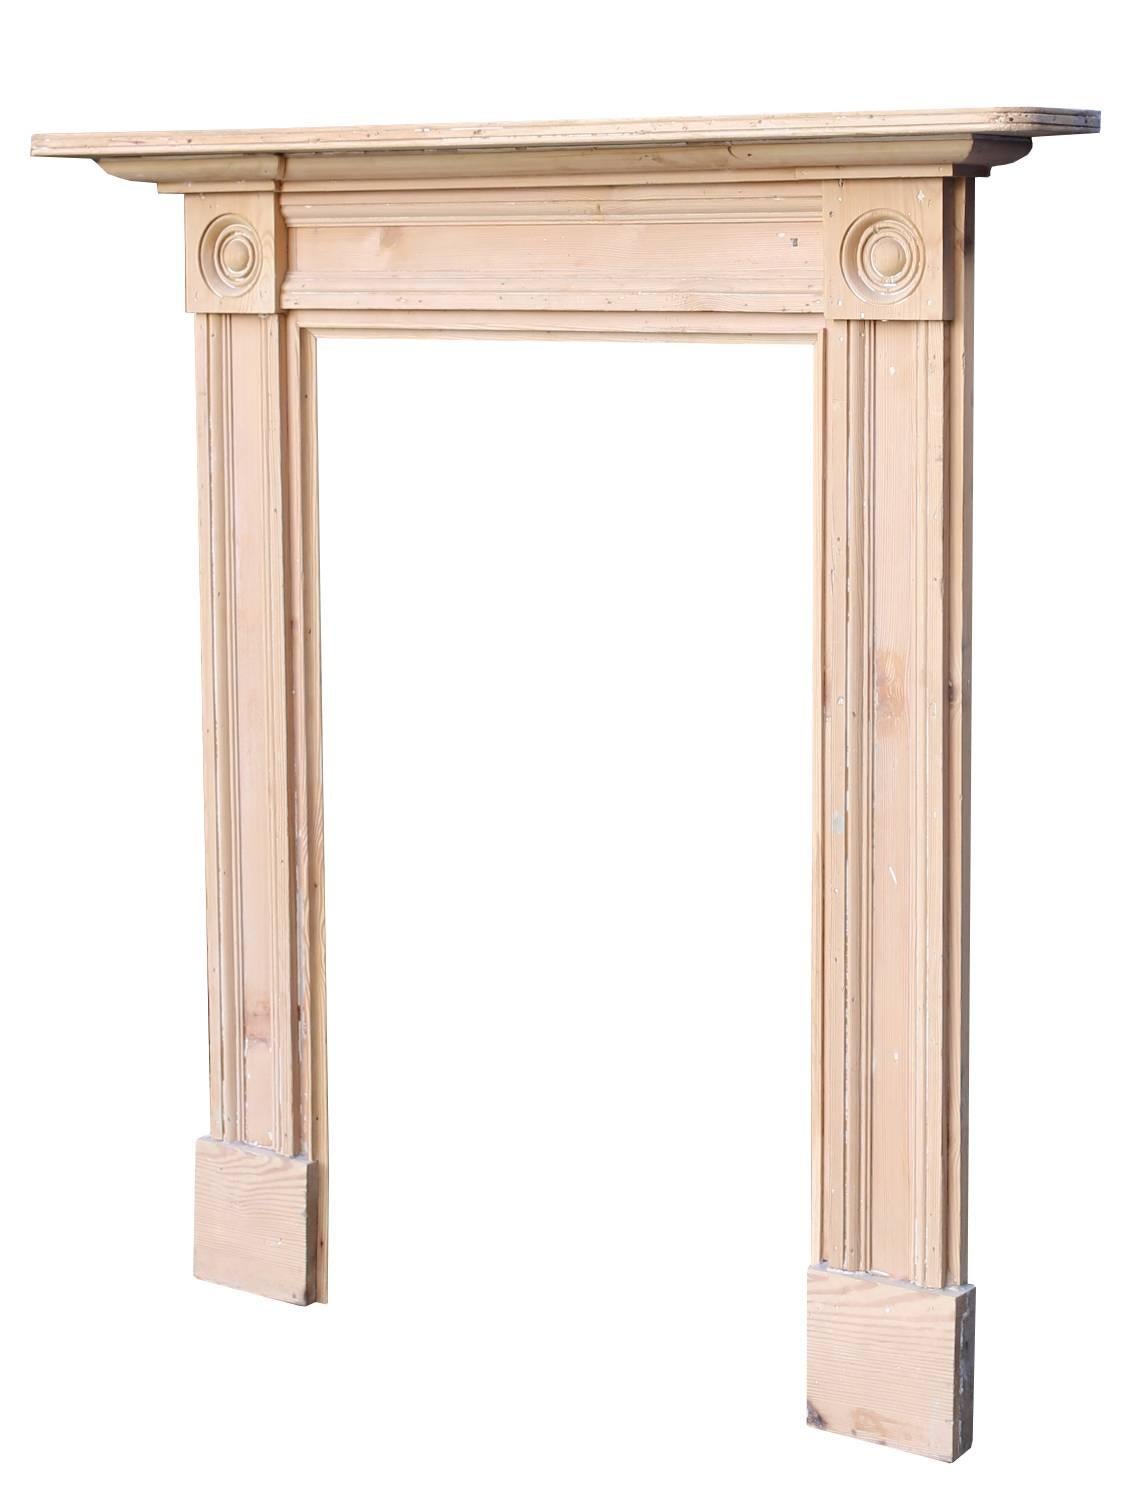 There are some small burn marks on this fire surround which can be expected from its age.
Opening height 95 cm
Opening width 54 cm
Width between legs 85 cm
Weight 10 kg.